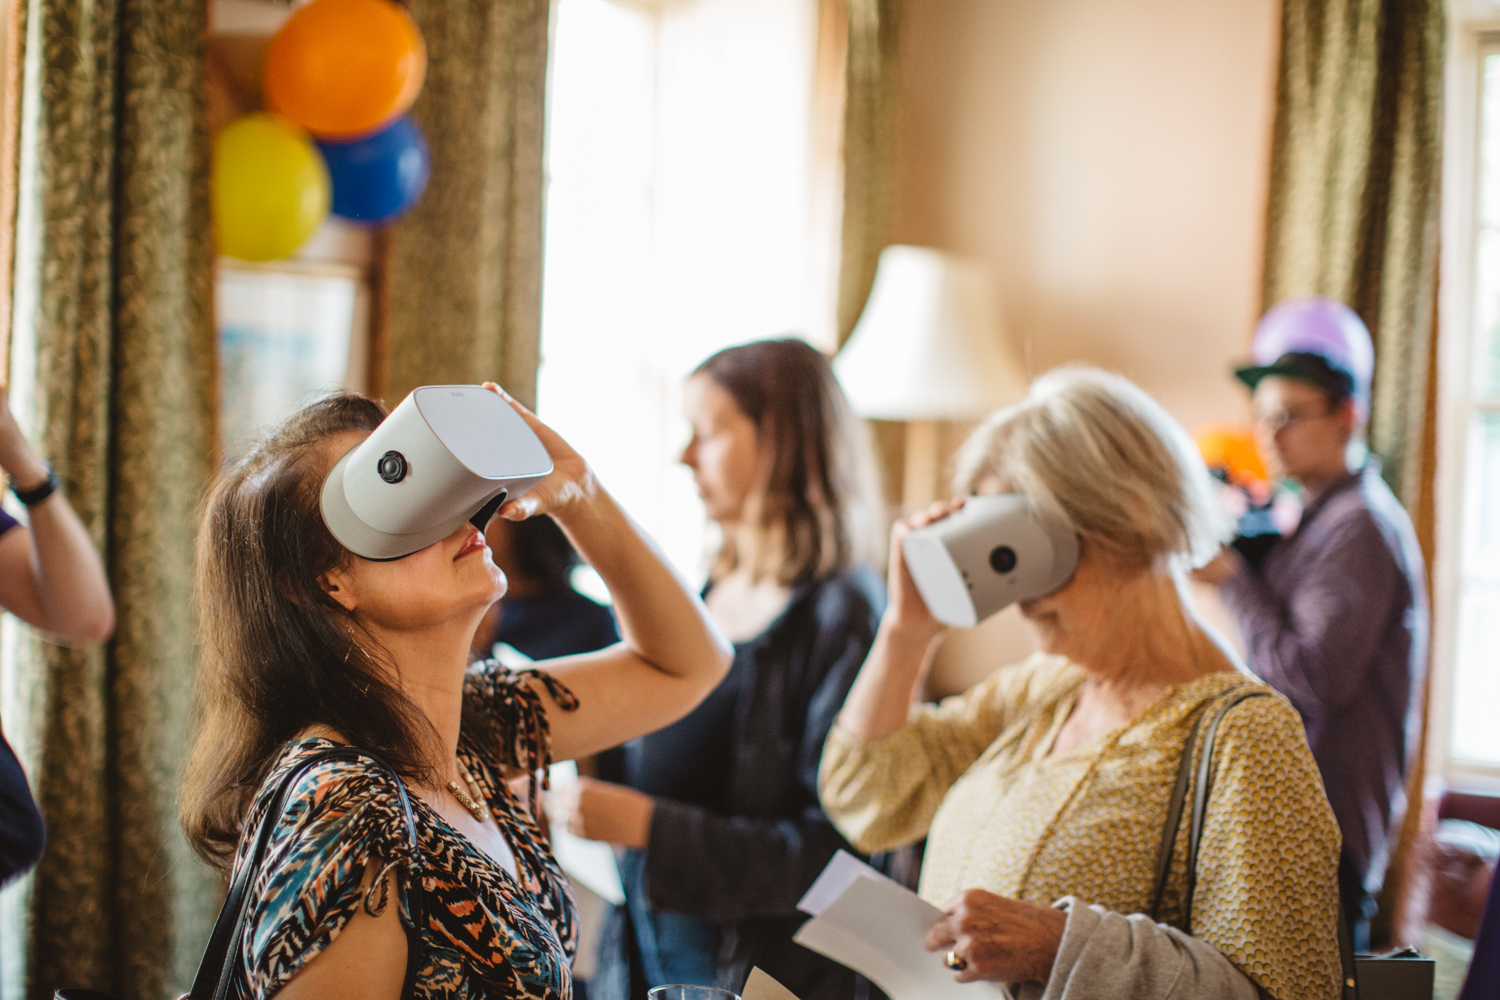 People experimenting with VR headsets, Futures, 2019 Photo: Ben Pryor